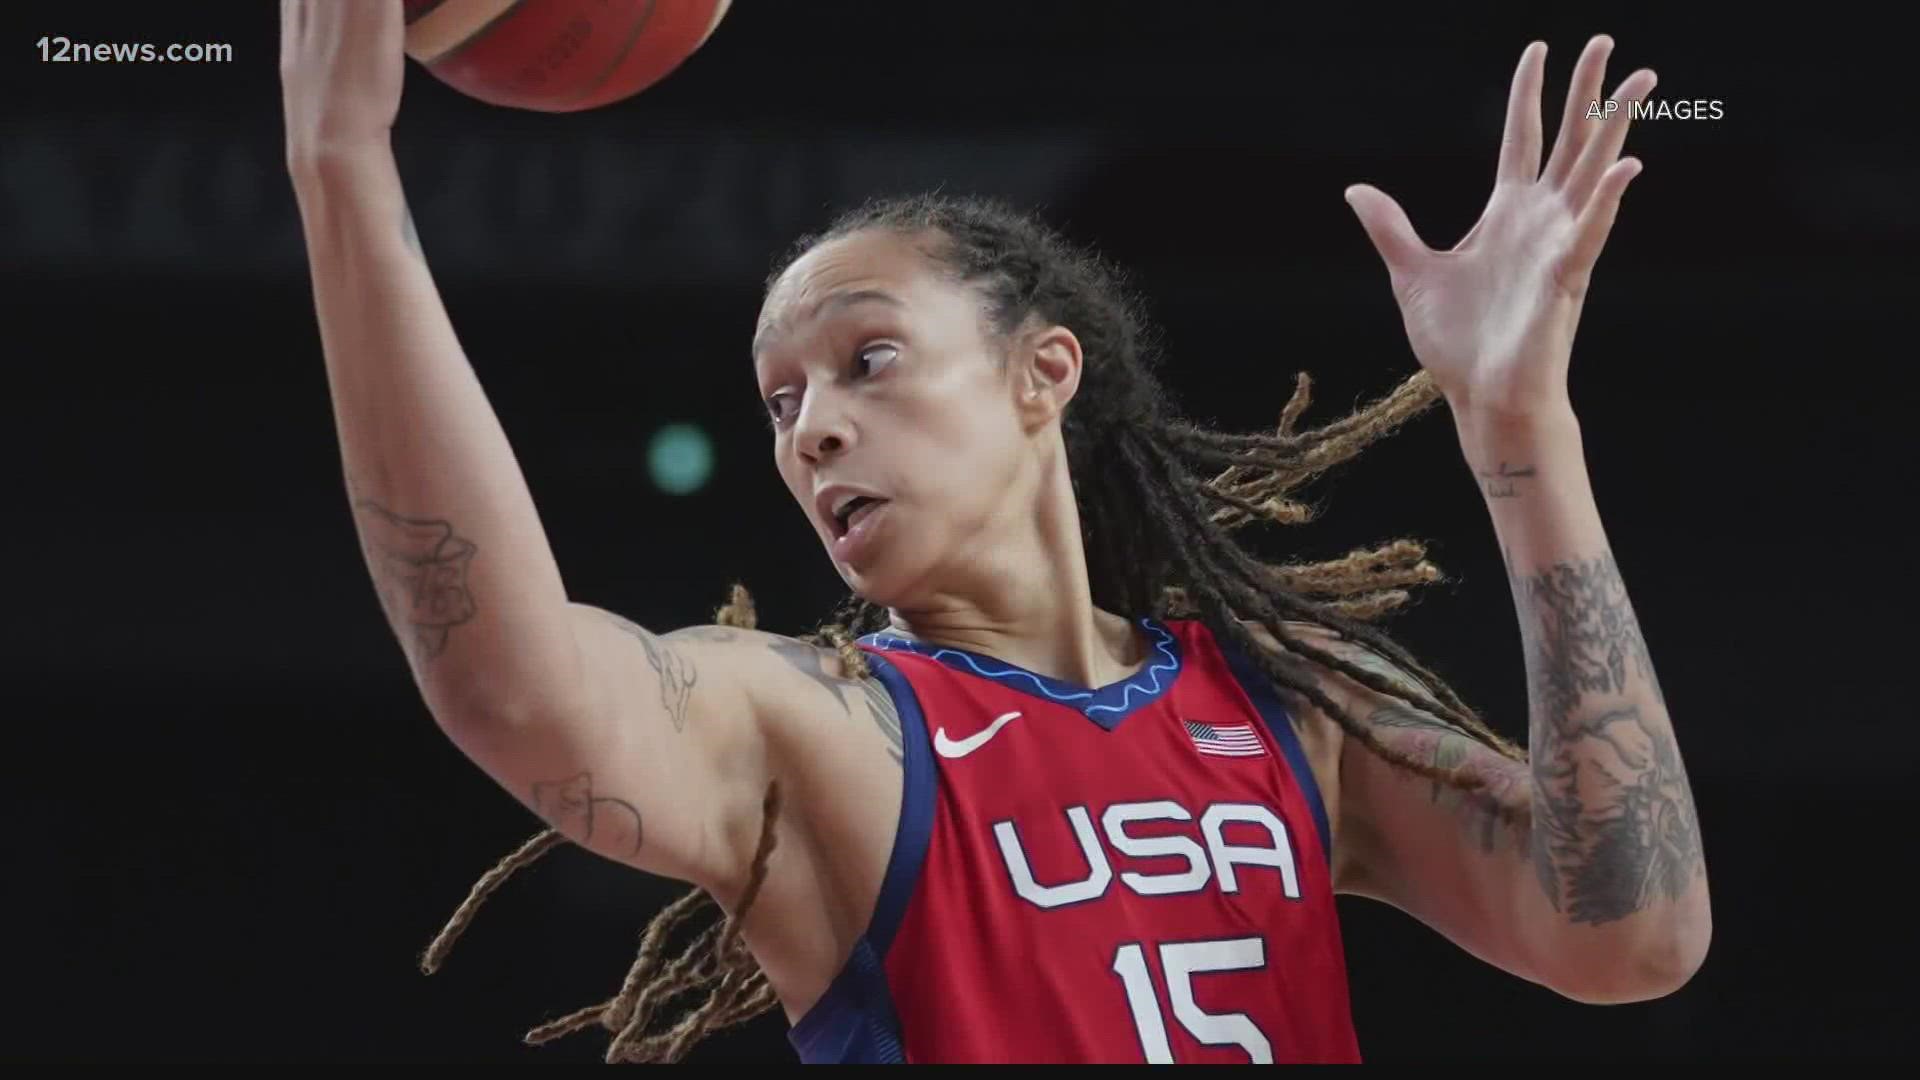 Brittney Griner S Wife Cherelle Thanks Fans For Support 12news Com